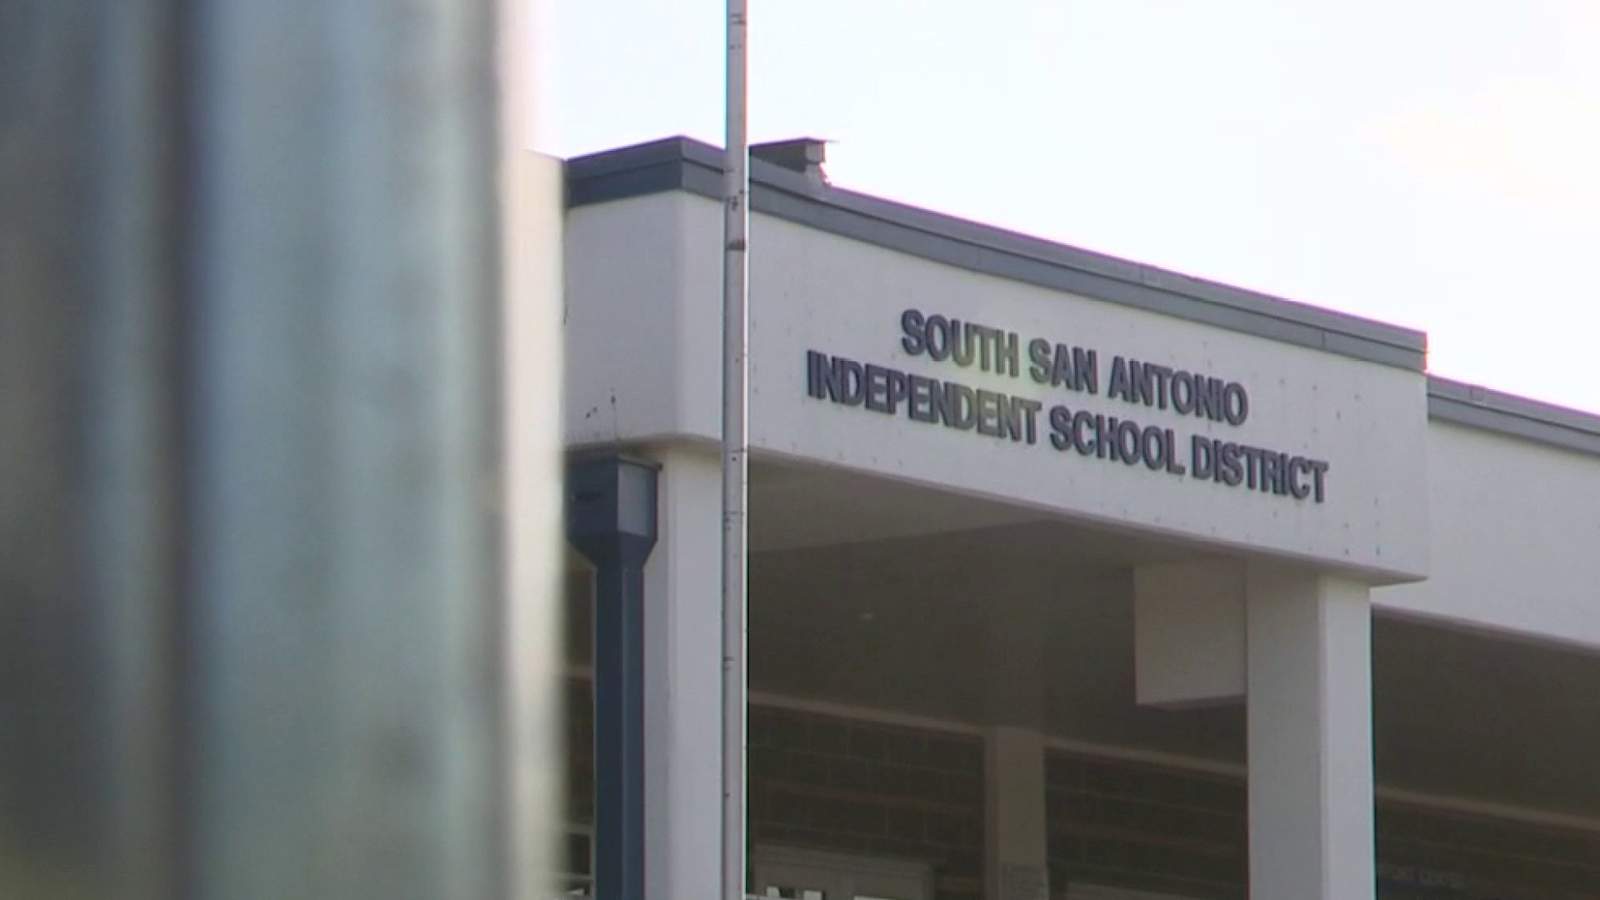 Internet is now working at South San Antonio ISD after issues Tuesday, officials say